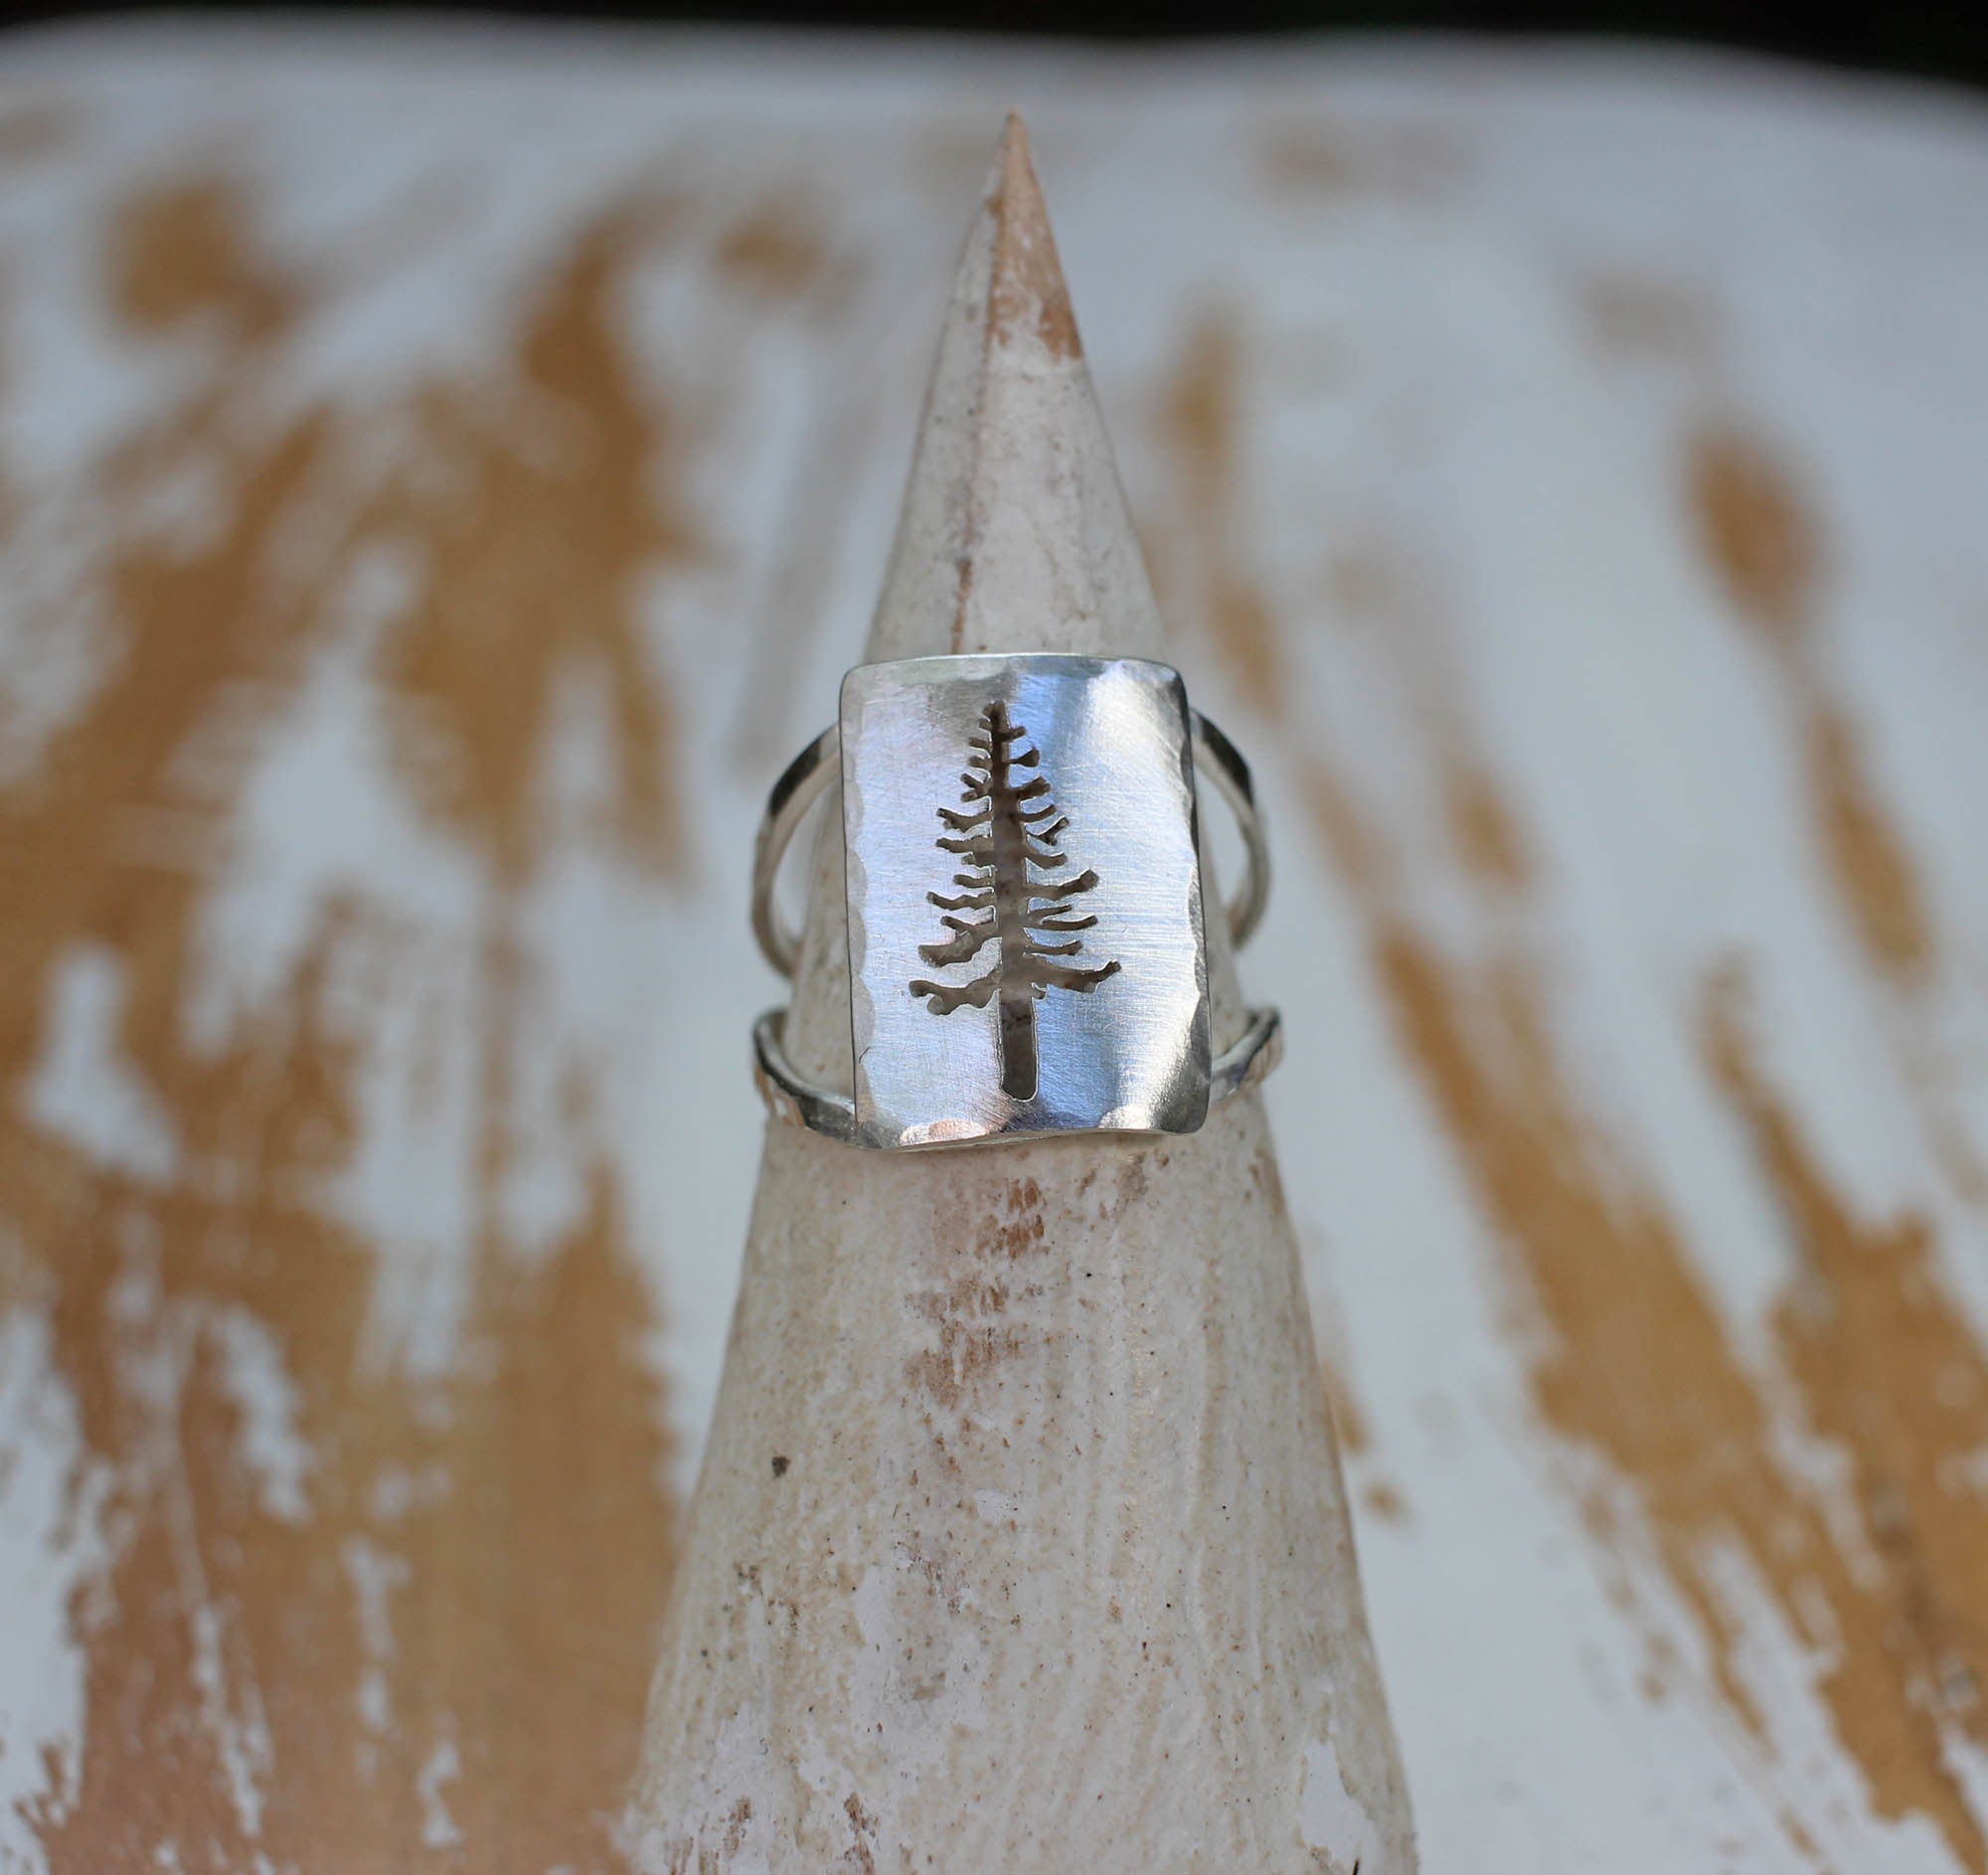 5 Alternatives To Permanently Resizing Your Treasured Rings. – Twelve  Silver Trees